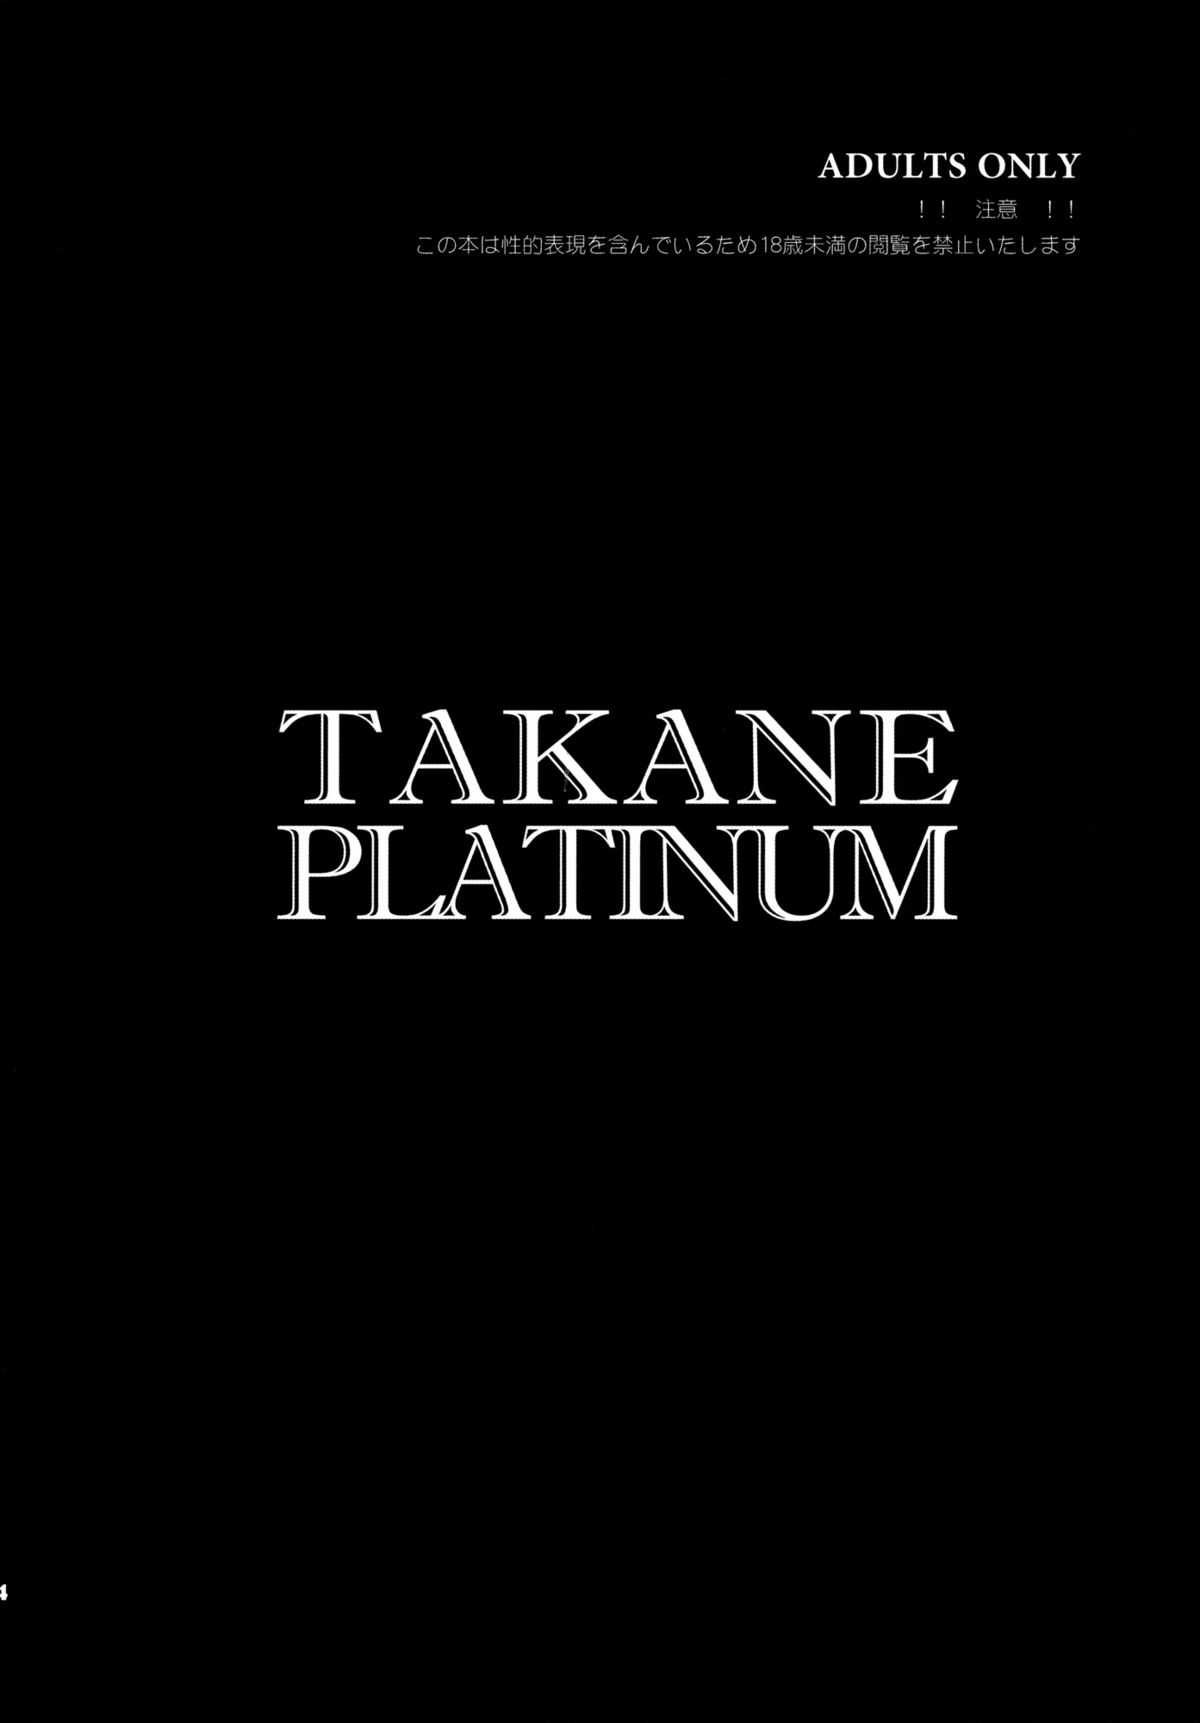 (CT18) [Todd Special] TAKANE PLATINUM (THE iDOLM@STER) (ENG) =TV= 